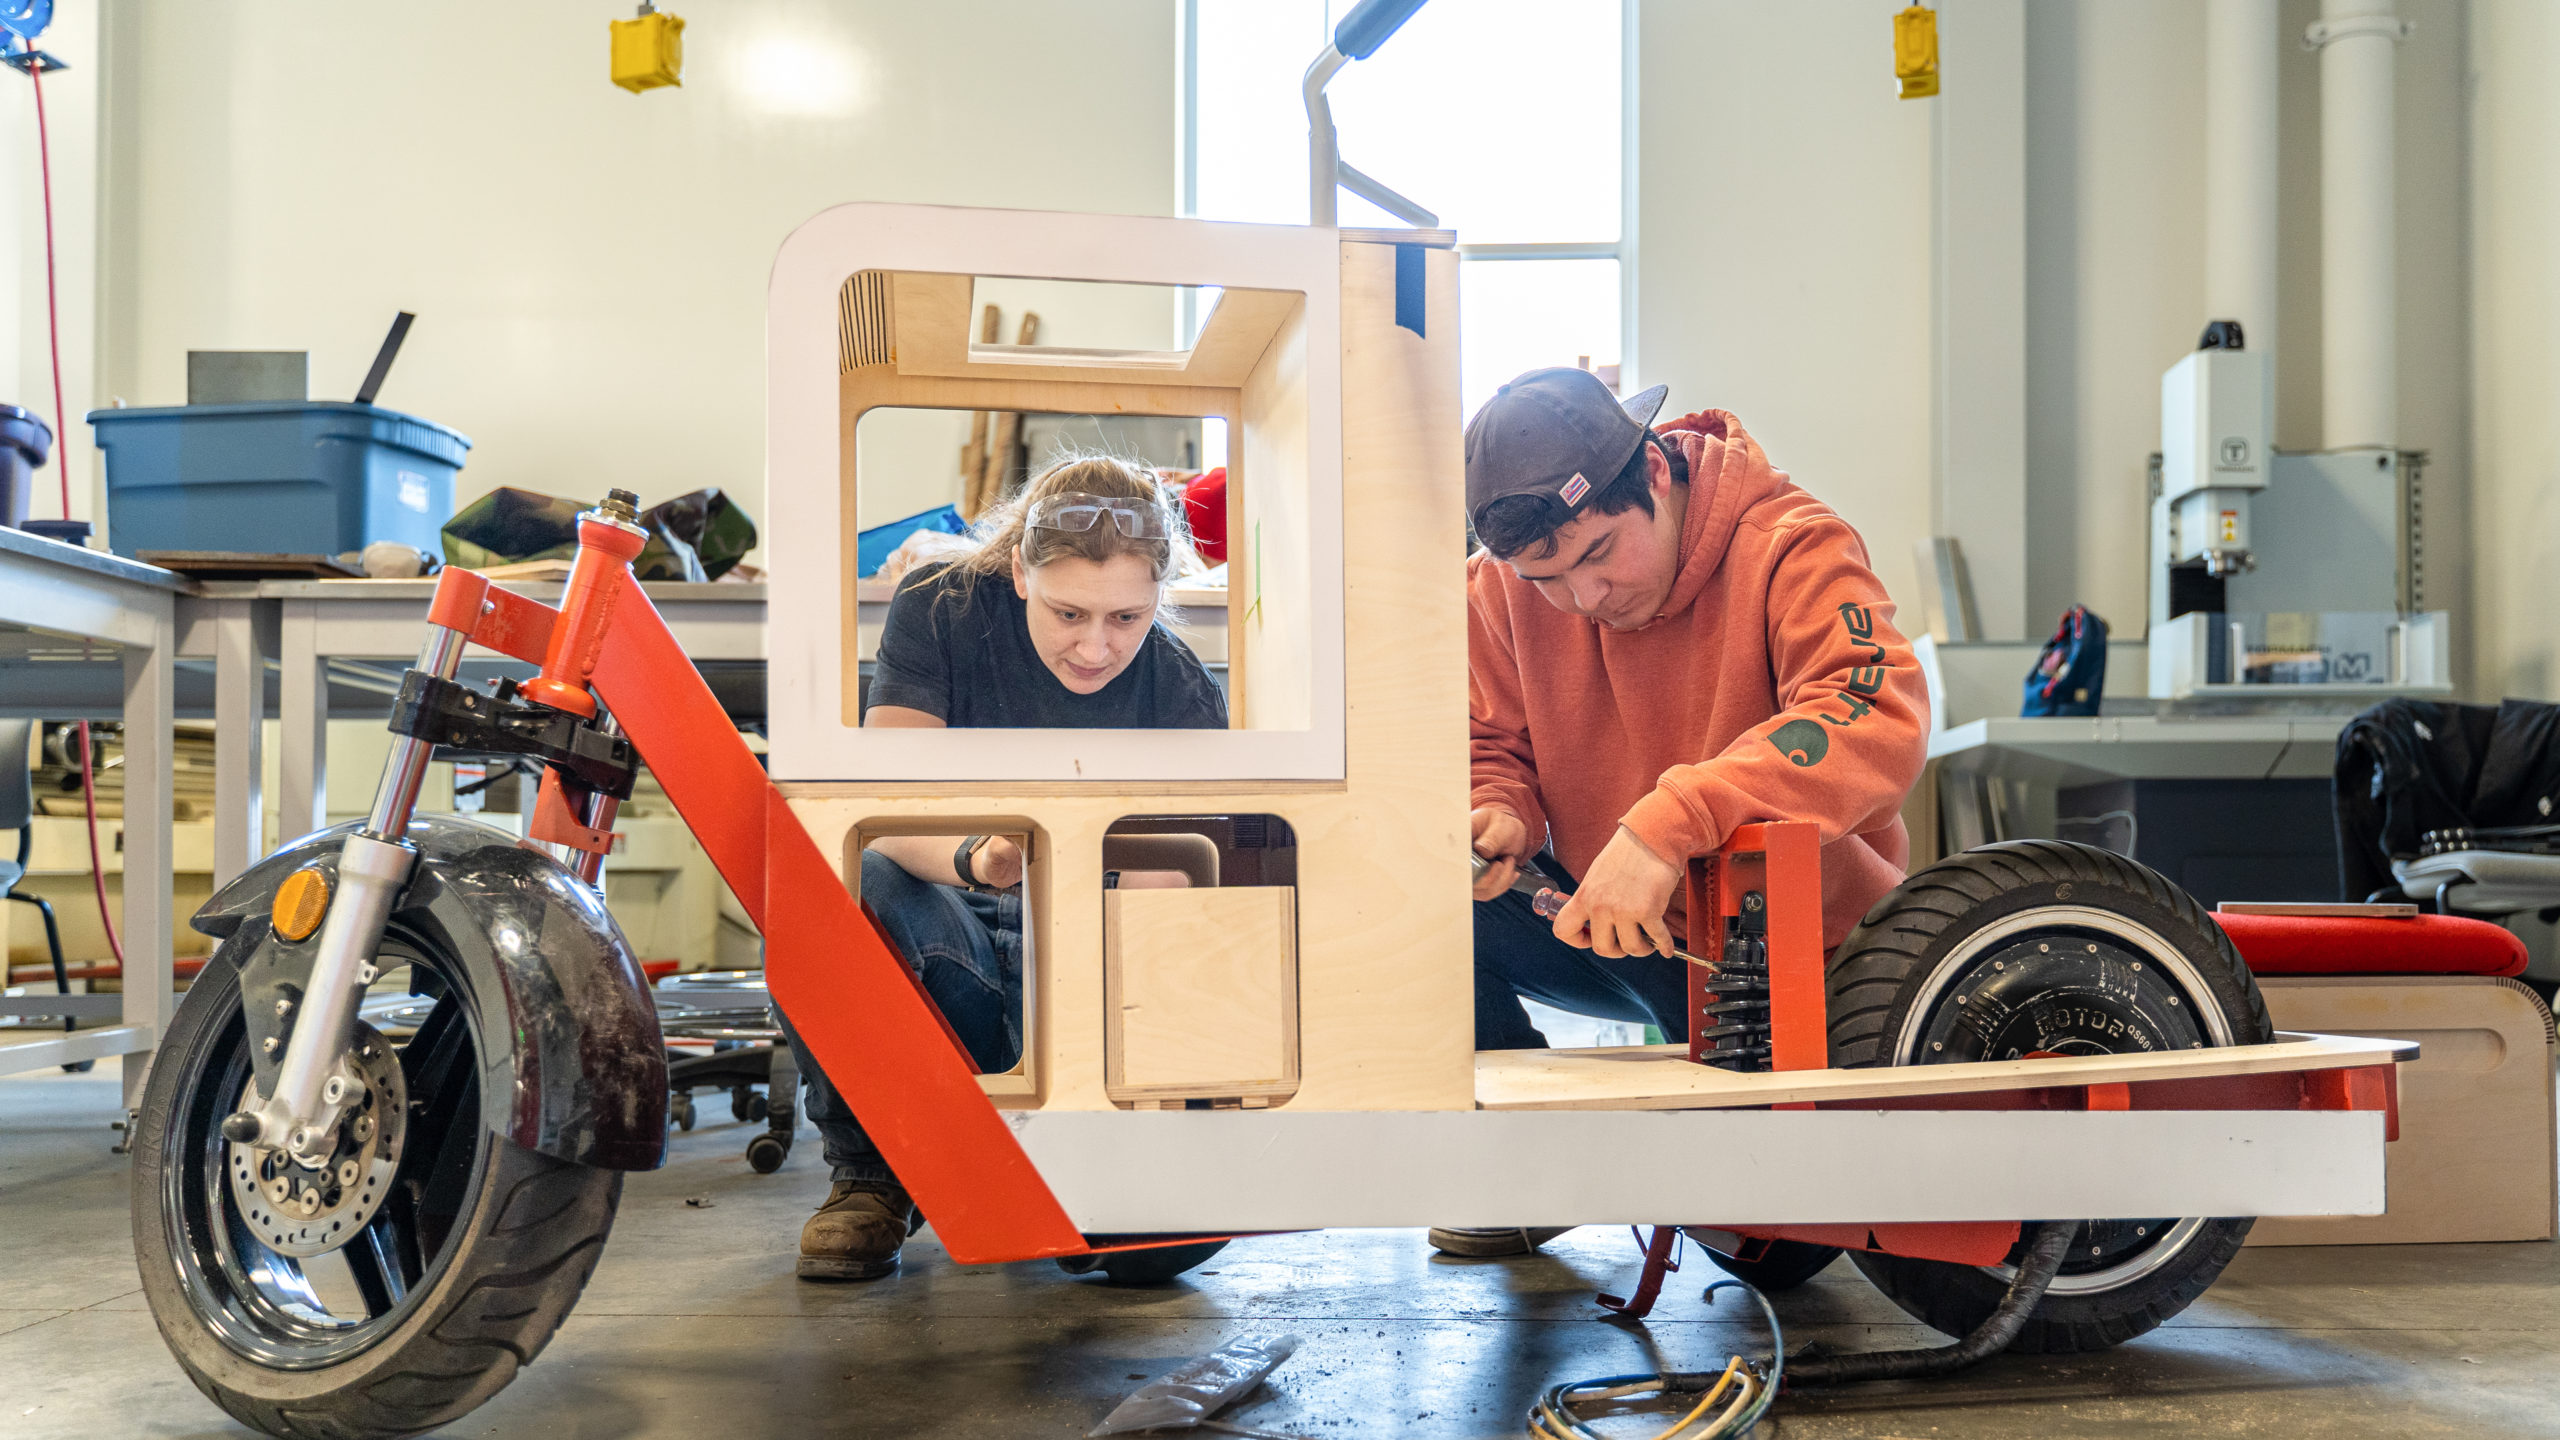 MSU Denver Industrial Design students Lydia Snyder and Andrew Baxte work on creating a functional electric cargo bike.